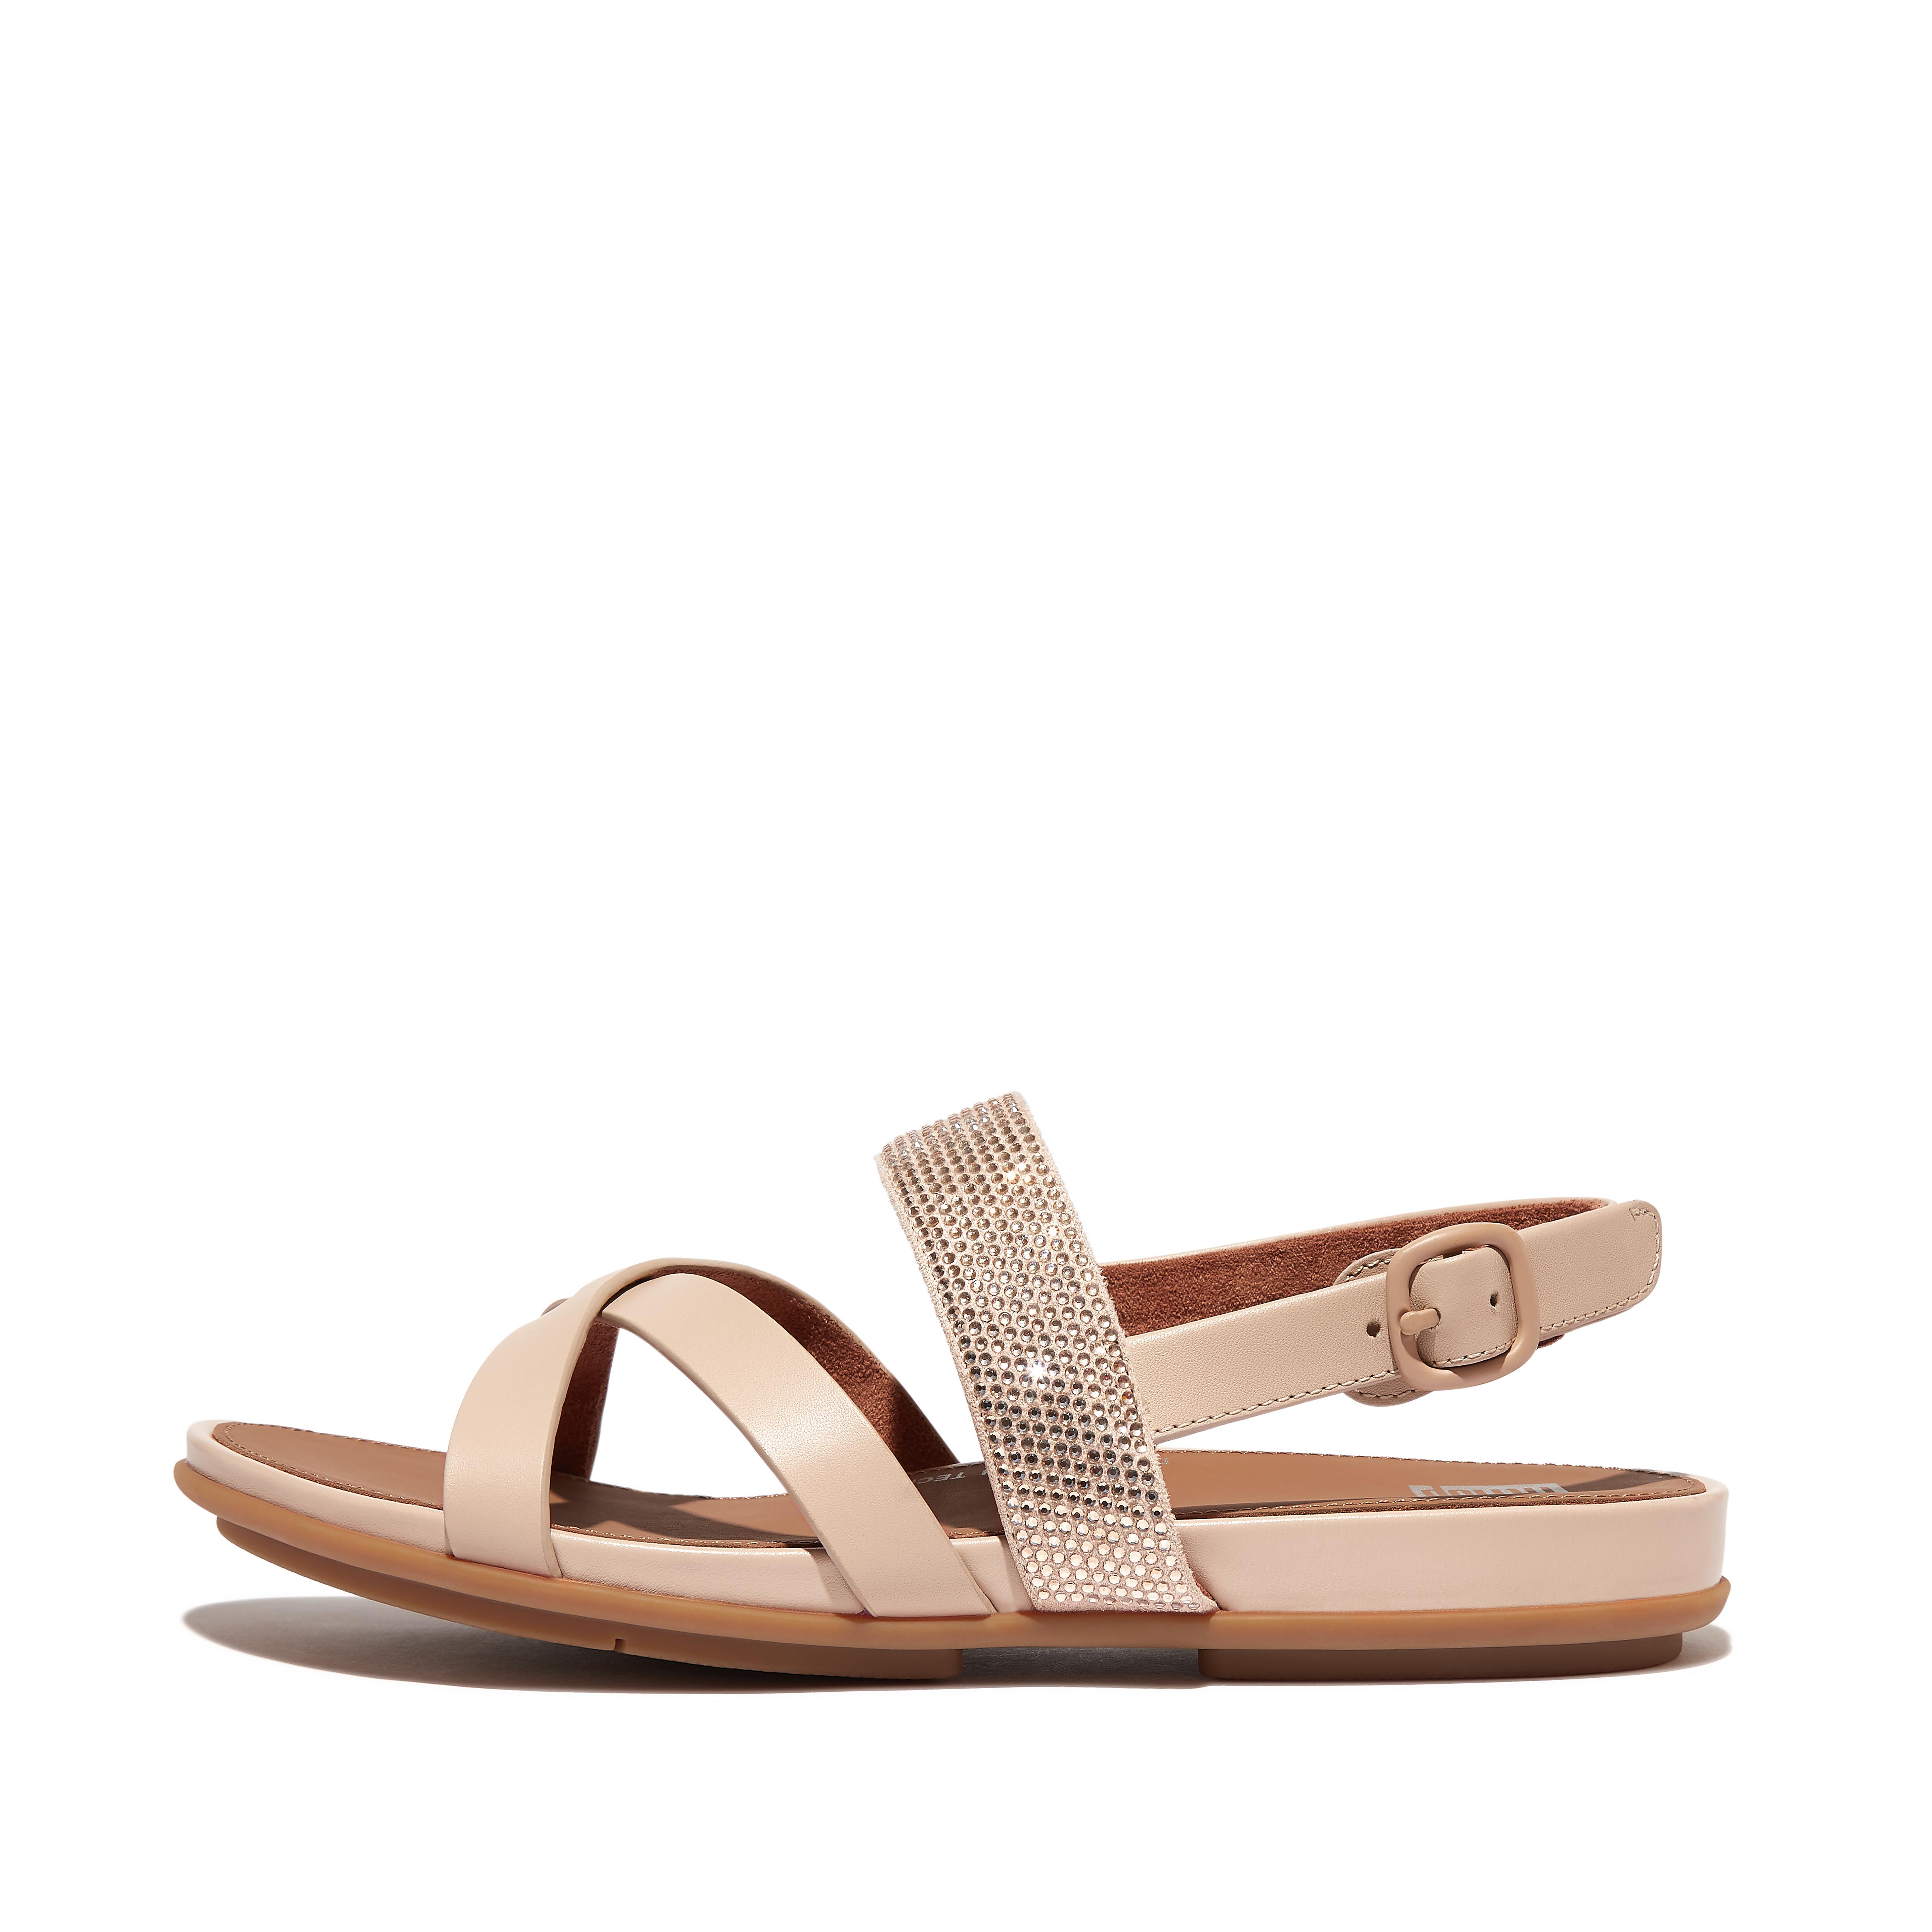 Fitflop Crystal Leather Strappy Back-Strap Sandals,Stone Beige